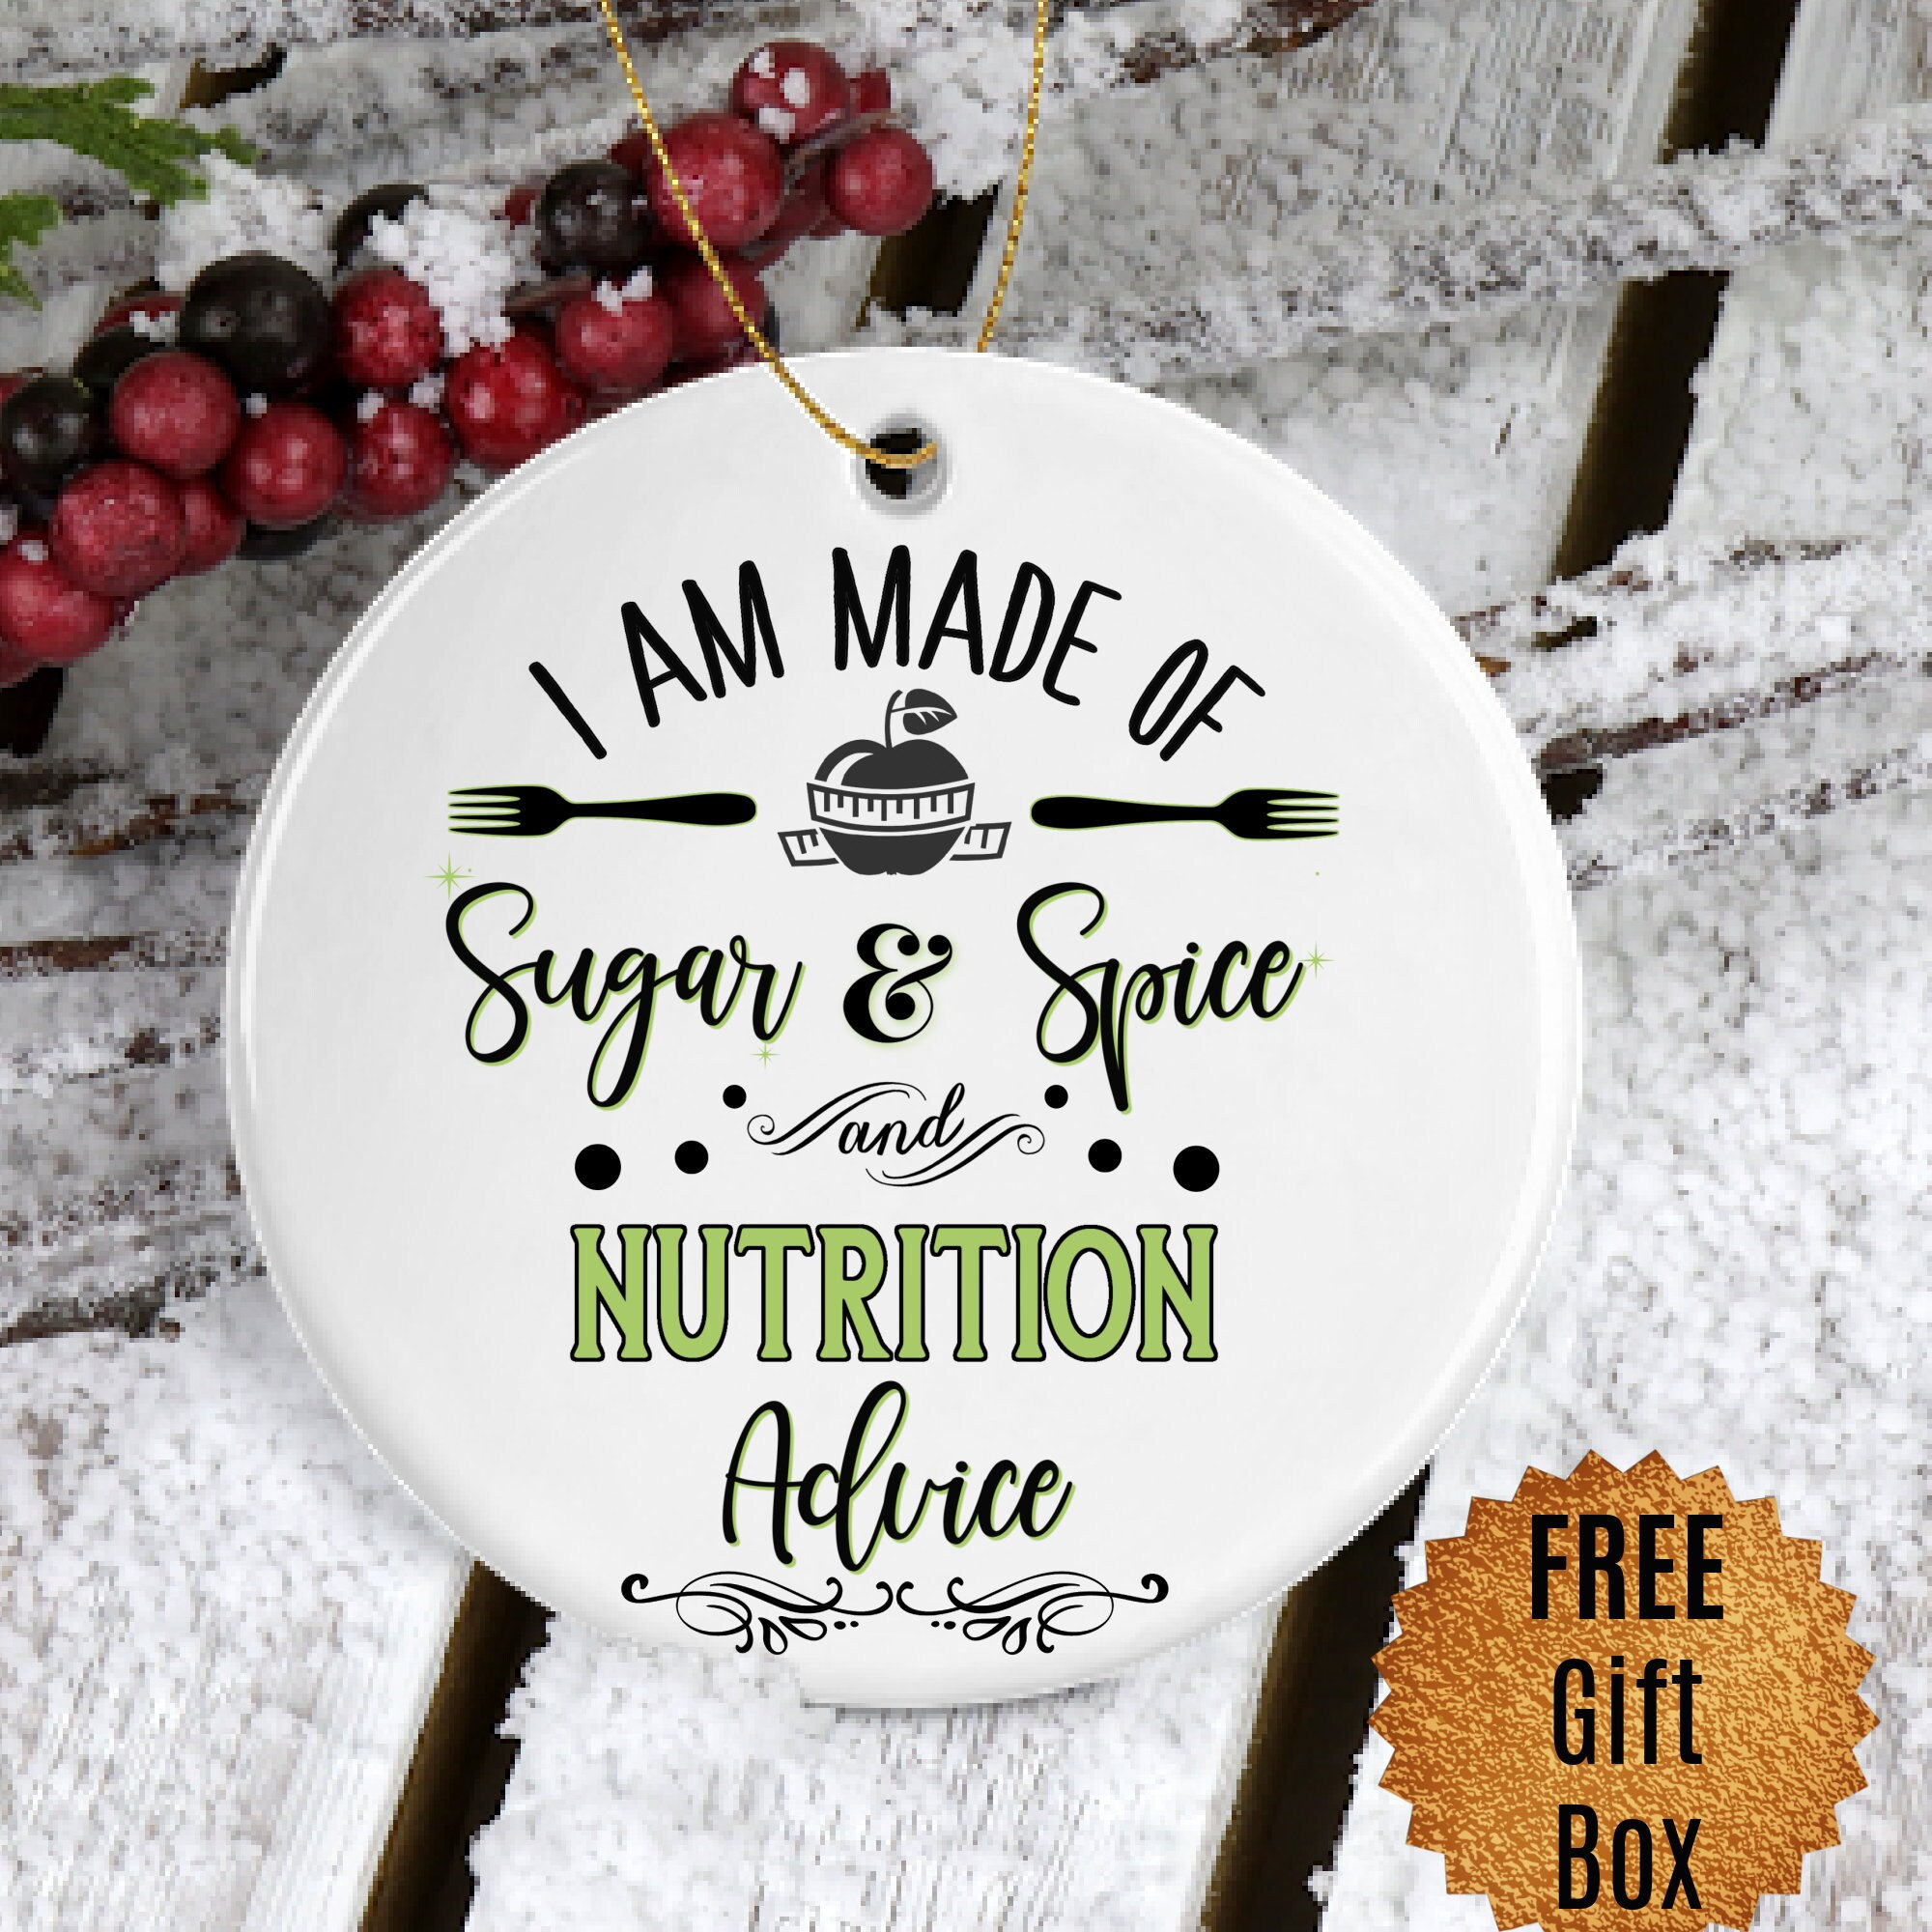 12 Healthy Gifts Created by Dietitians